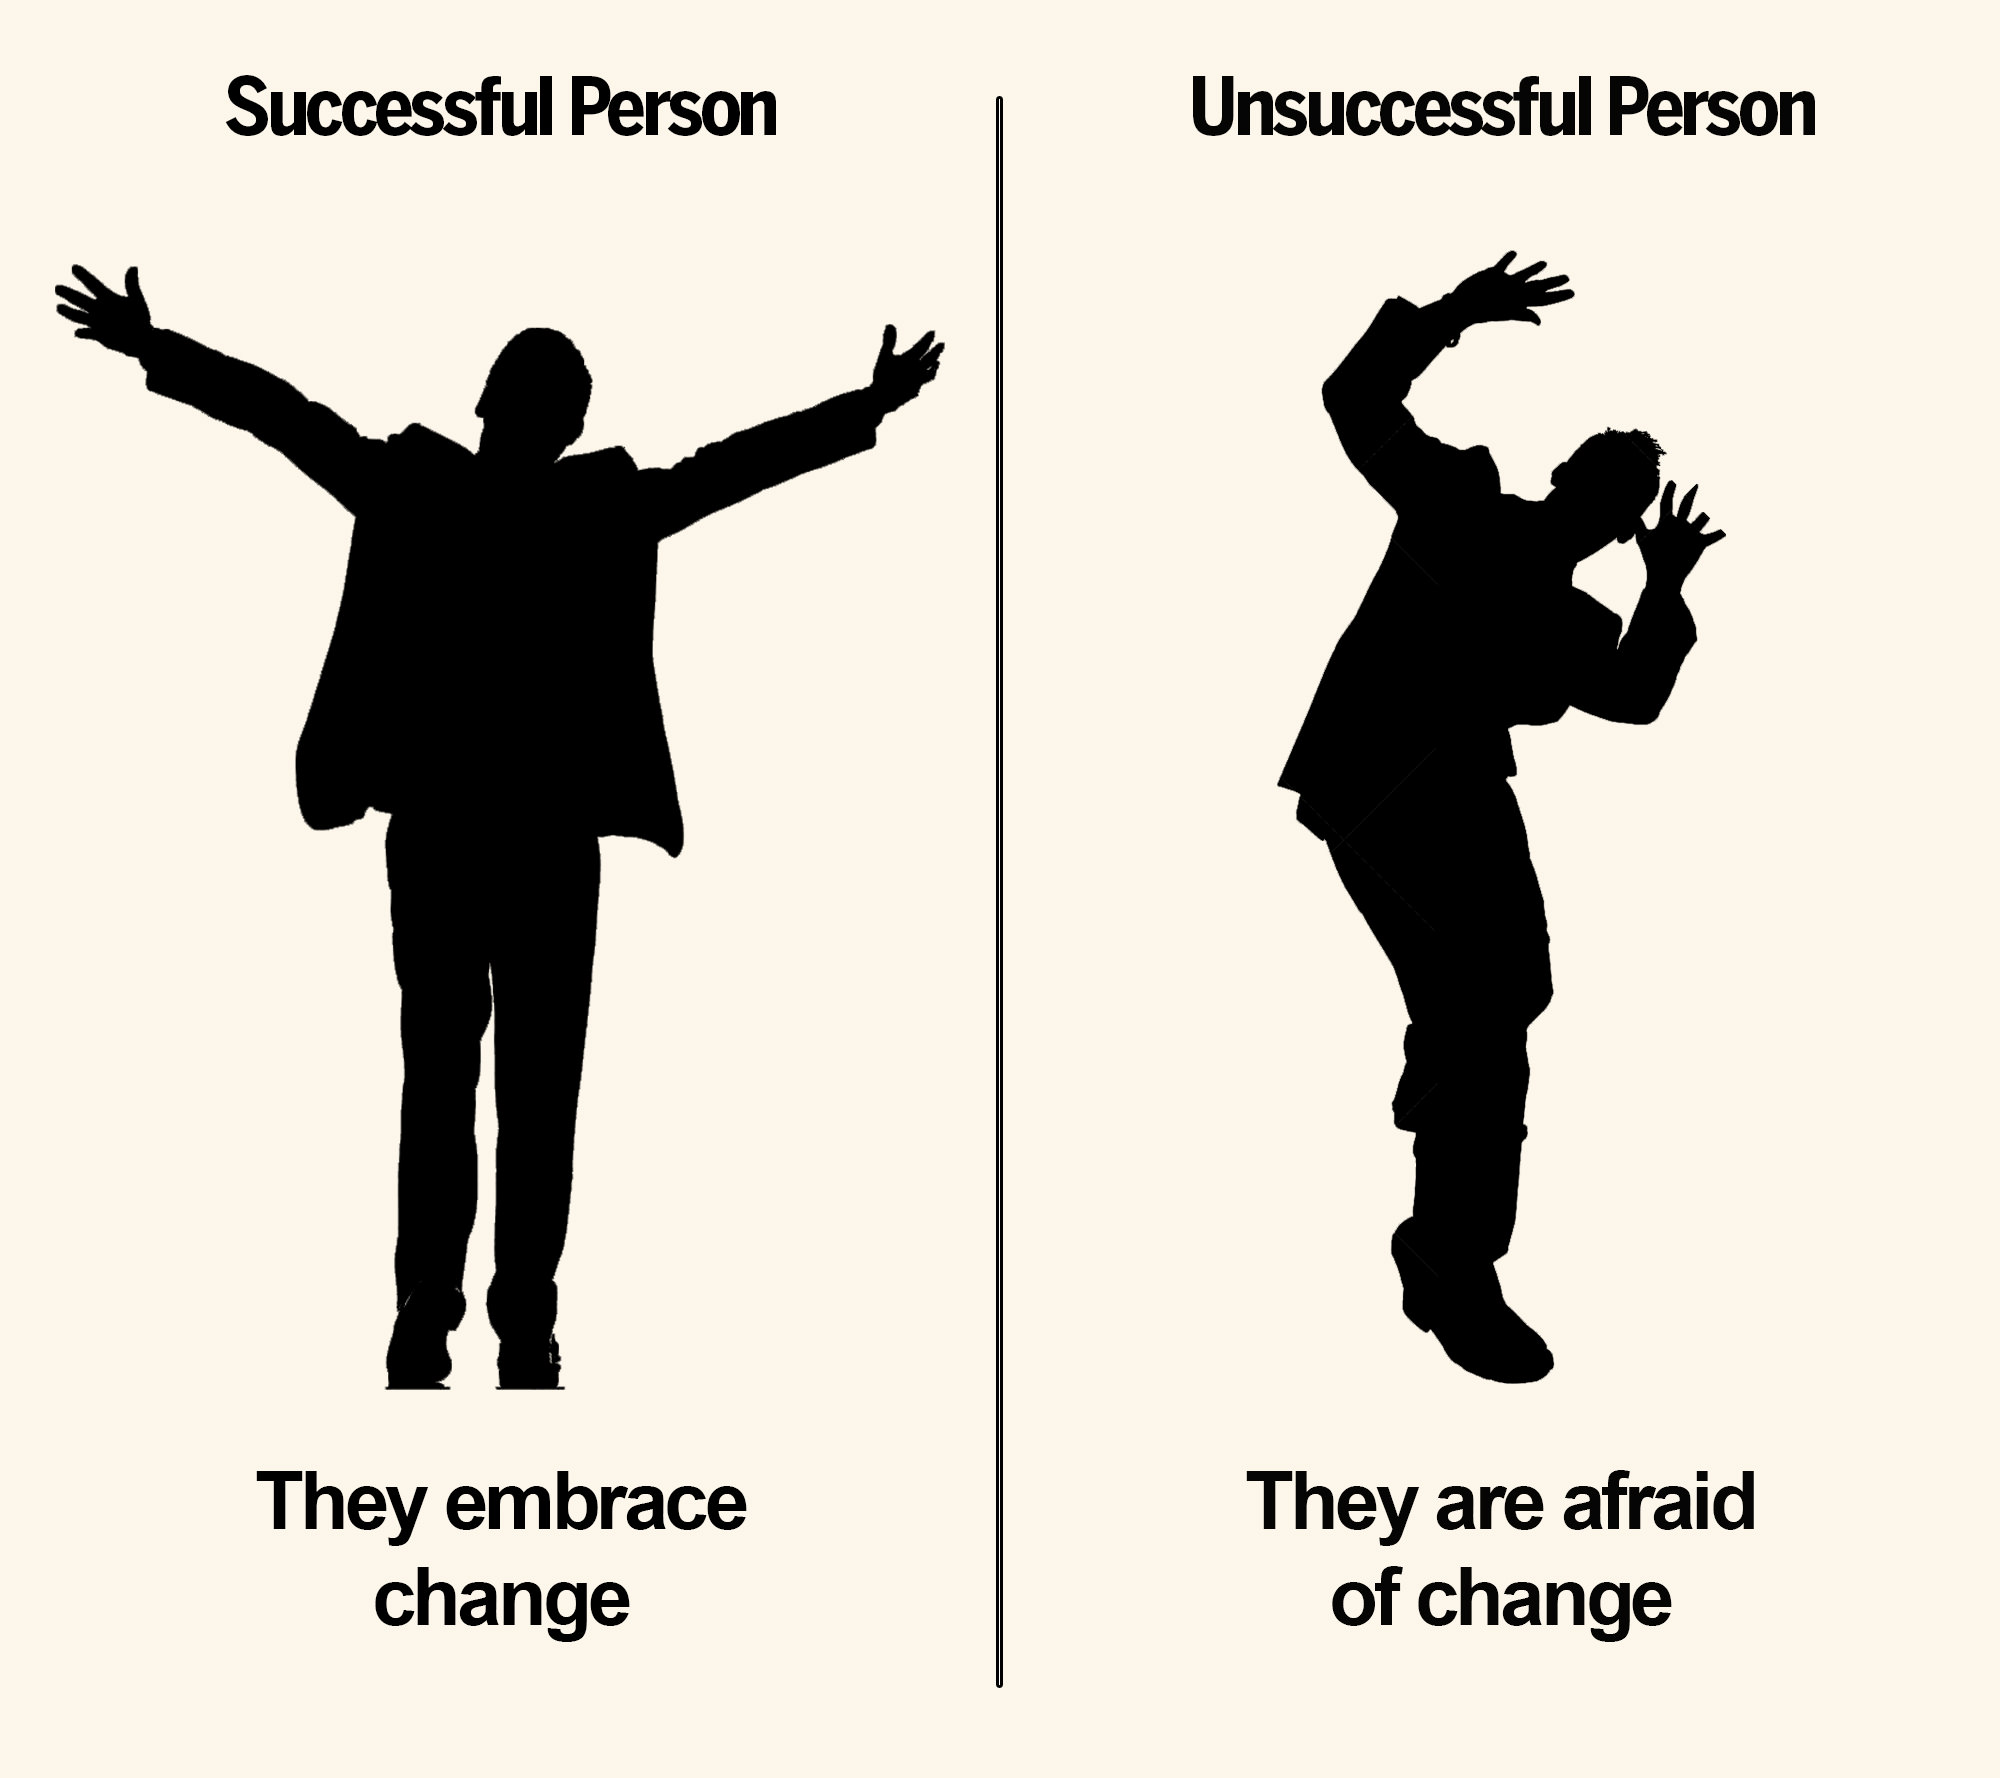 7 Characteristic of Successful vs Unsuccessful Person in Business and Life